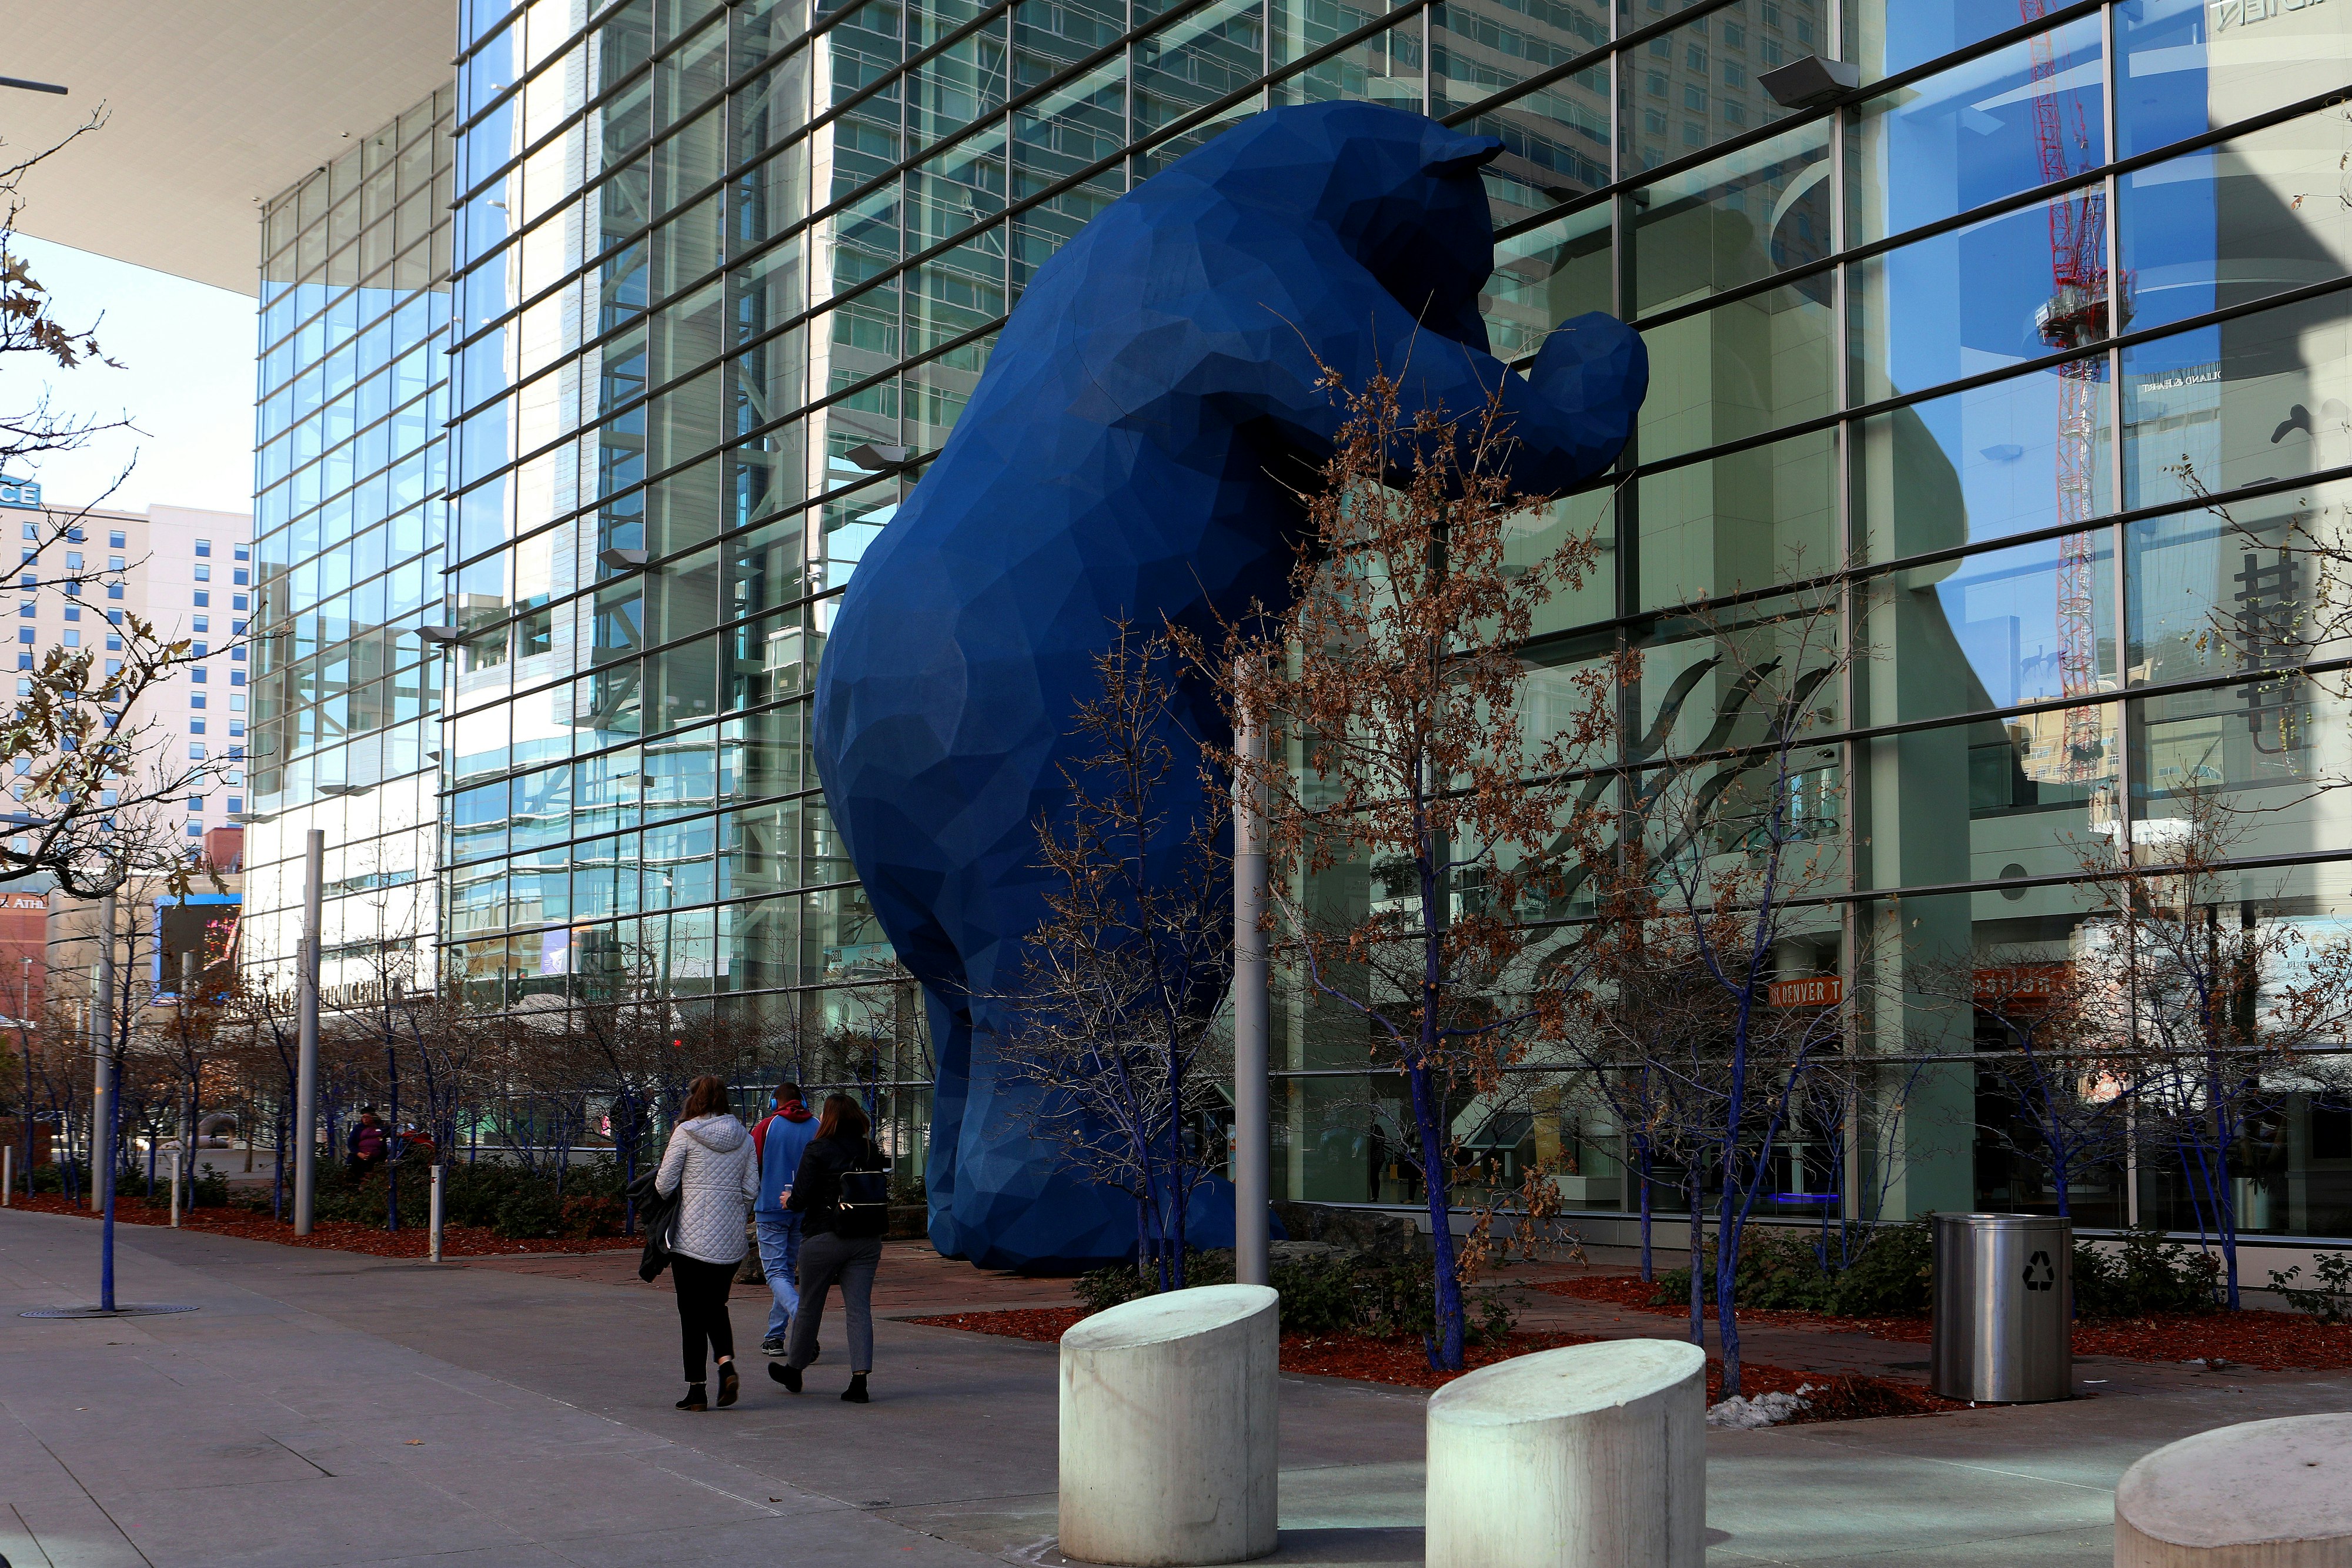 A sculpture of a giant blue bear peering into a building in Denver